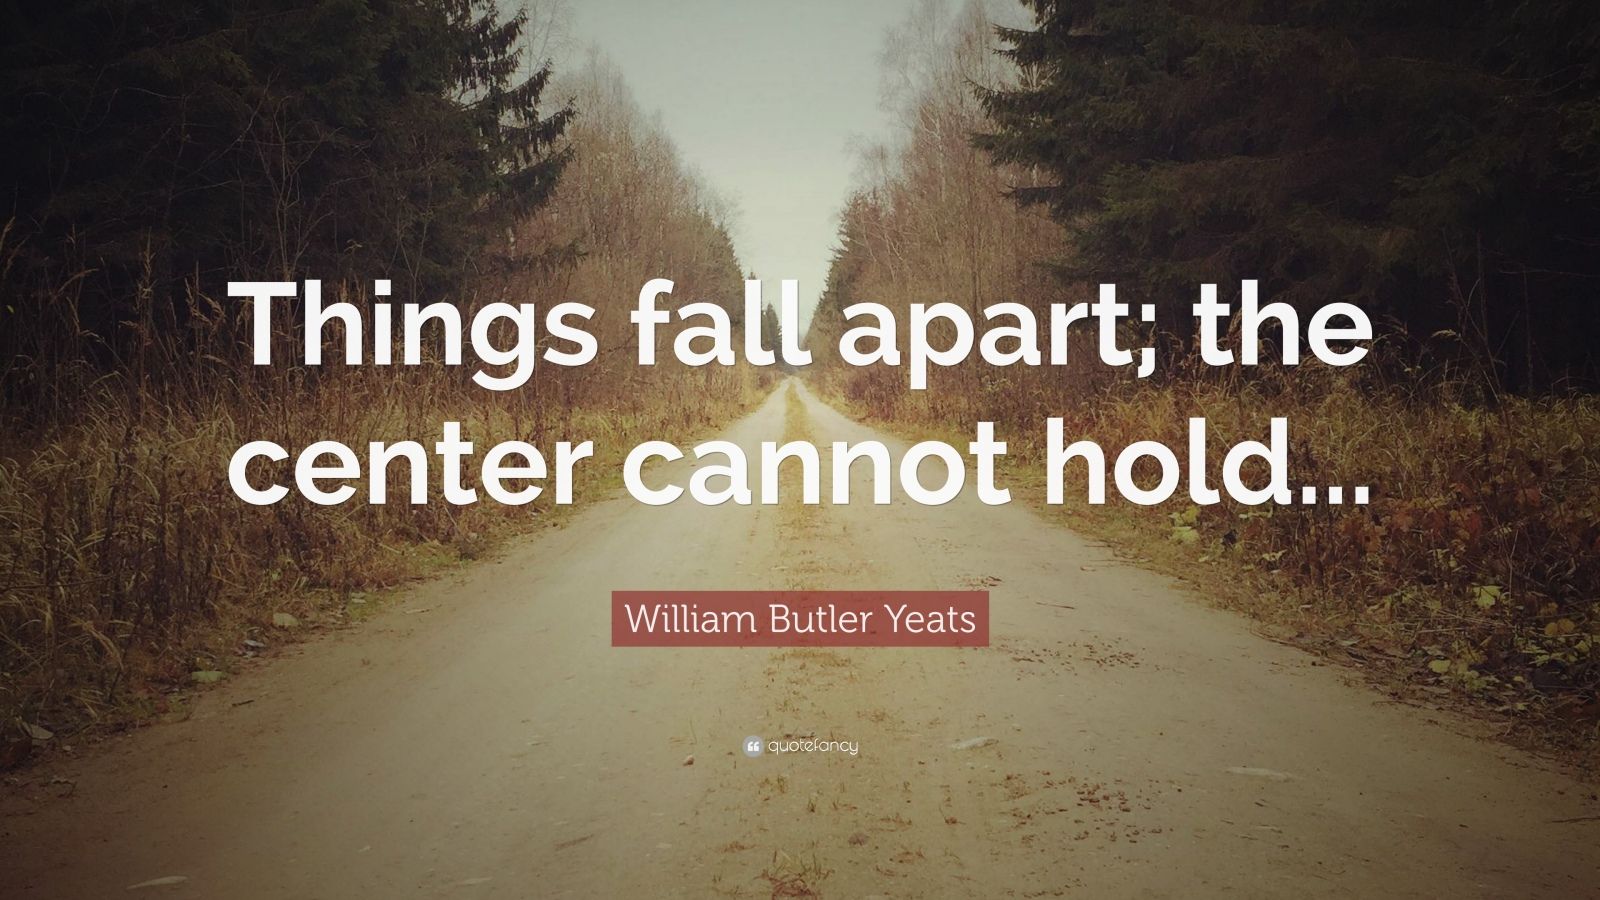 William Butler Yeats Quote: “Things fall apart; the center cannot hold